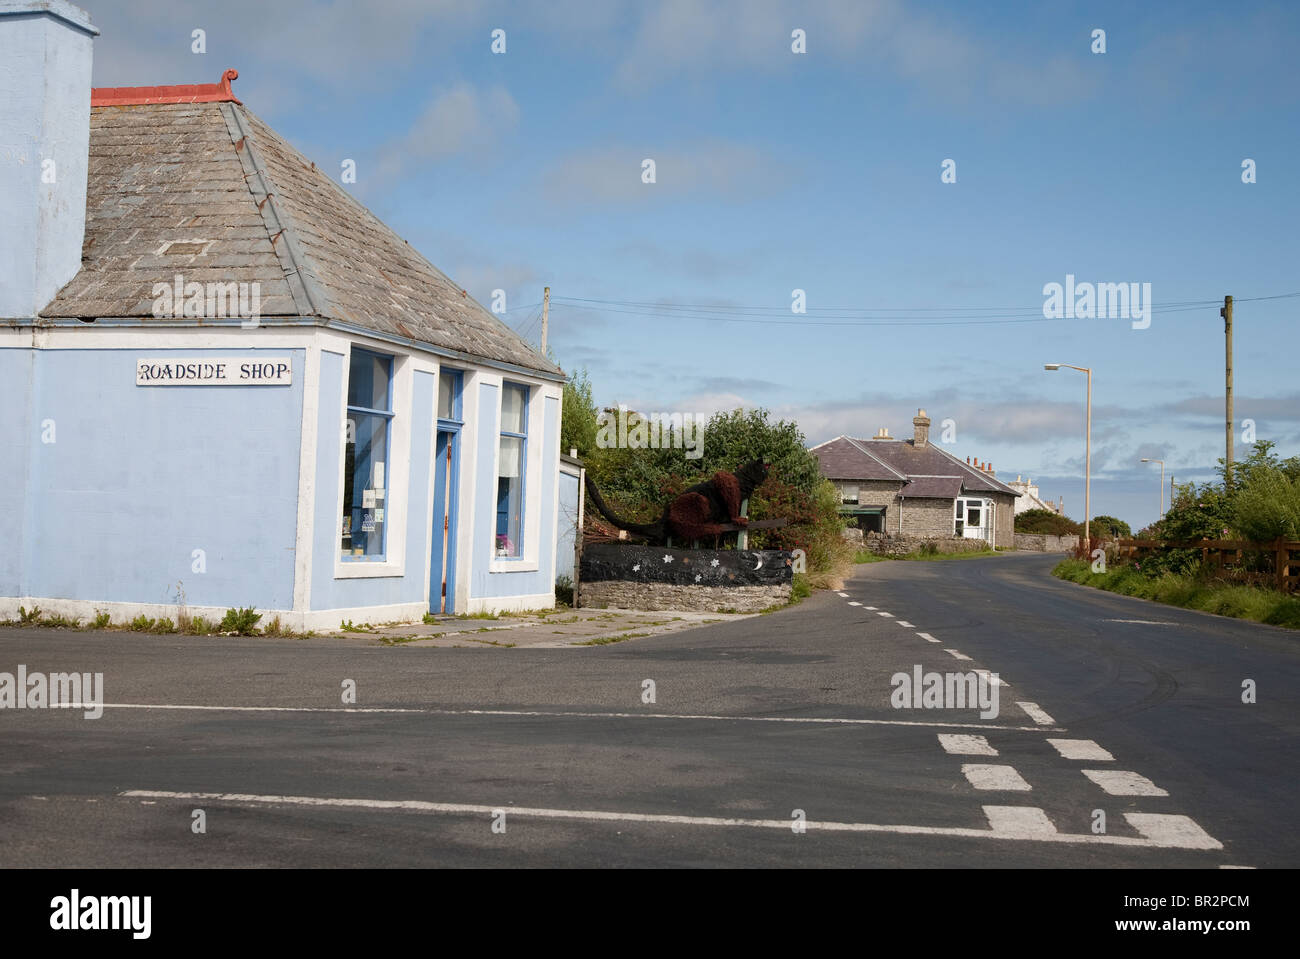 Roadside Shop in the Village of Lady on the Isle of Sanday, Orkney Islands, Scotland Stock Photo